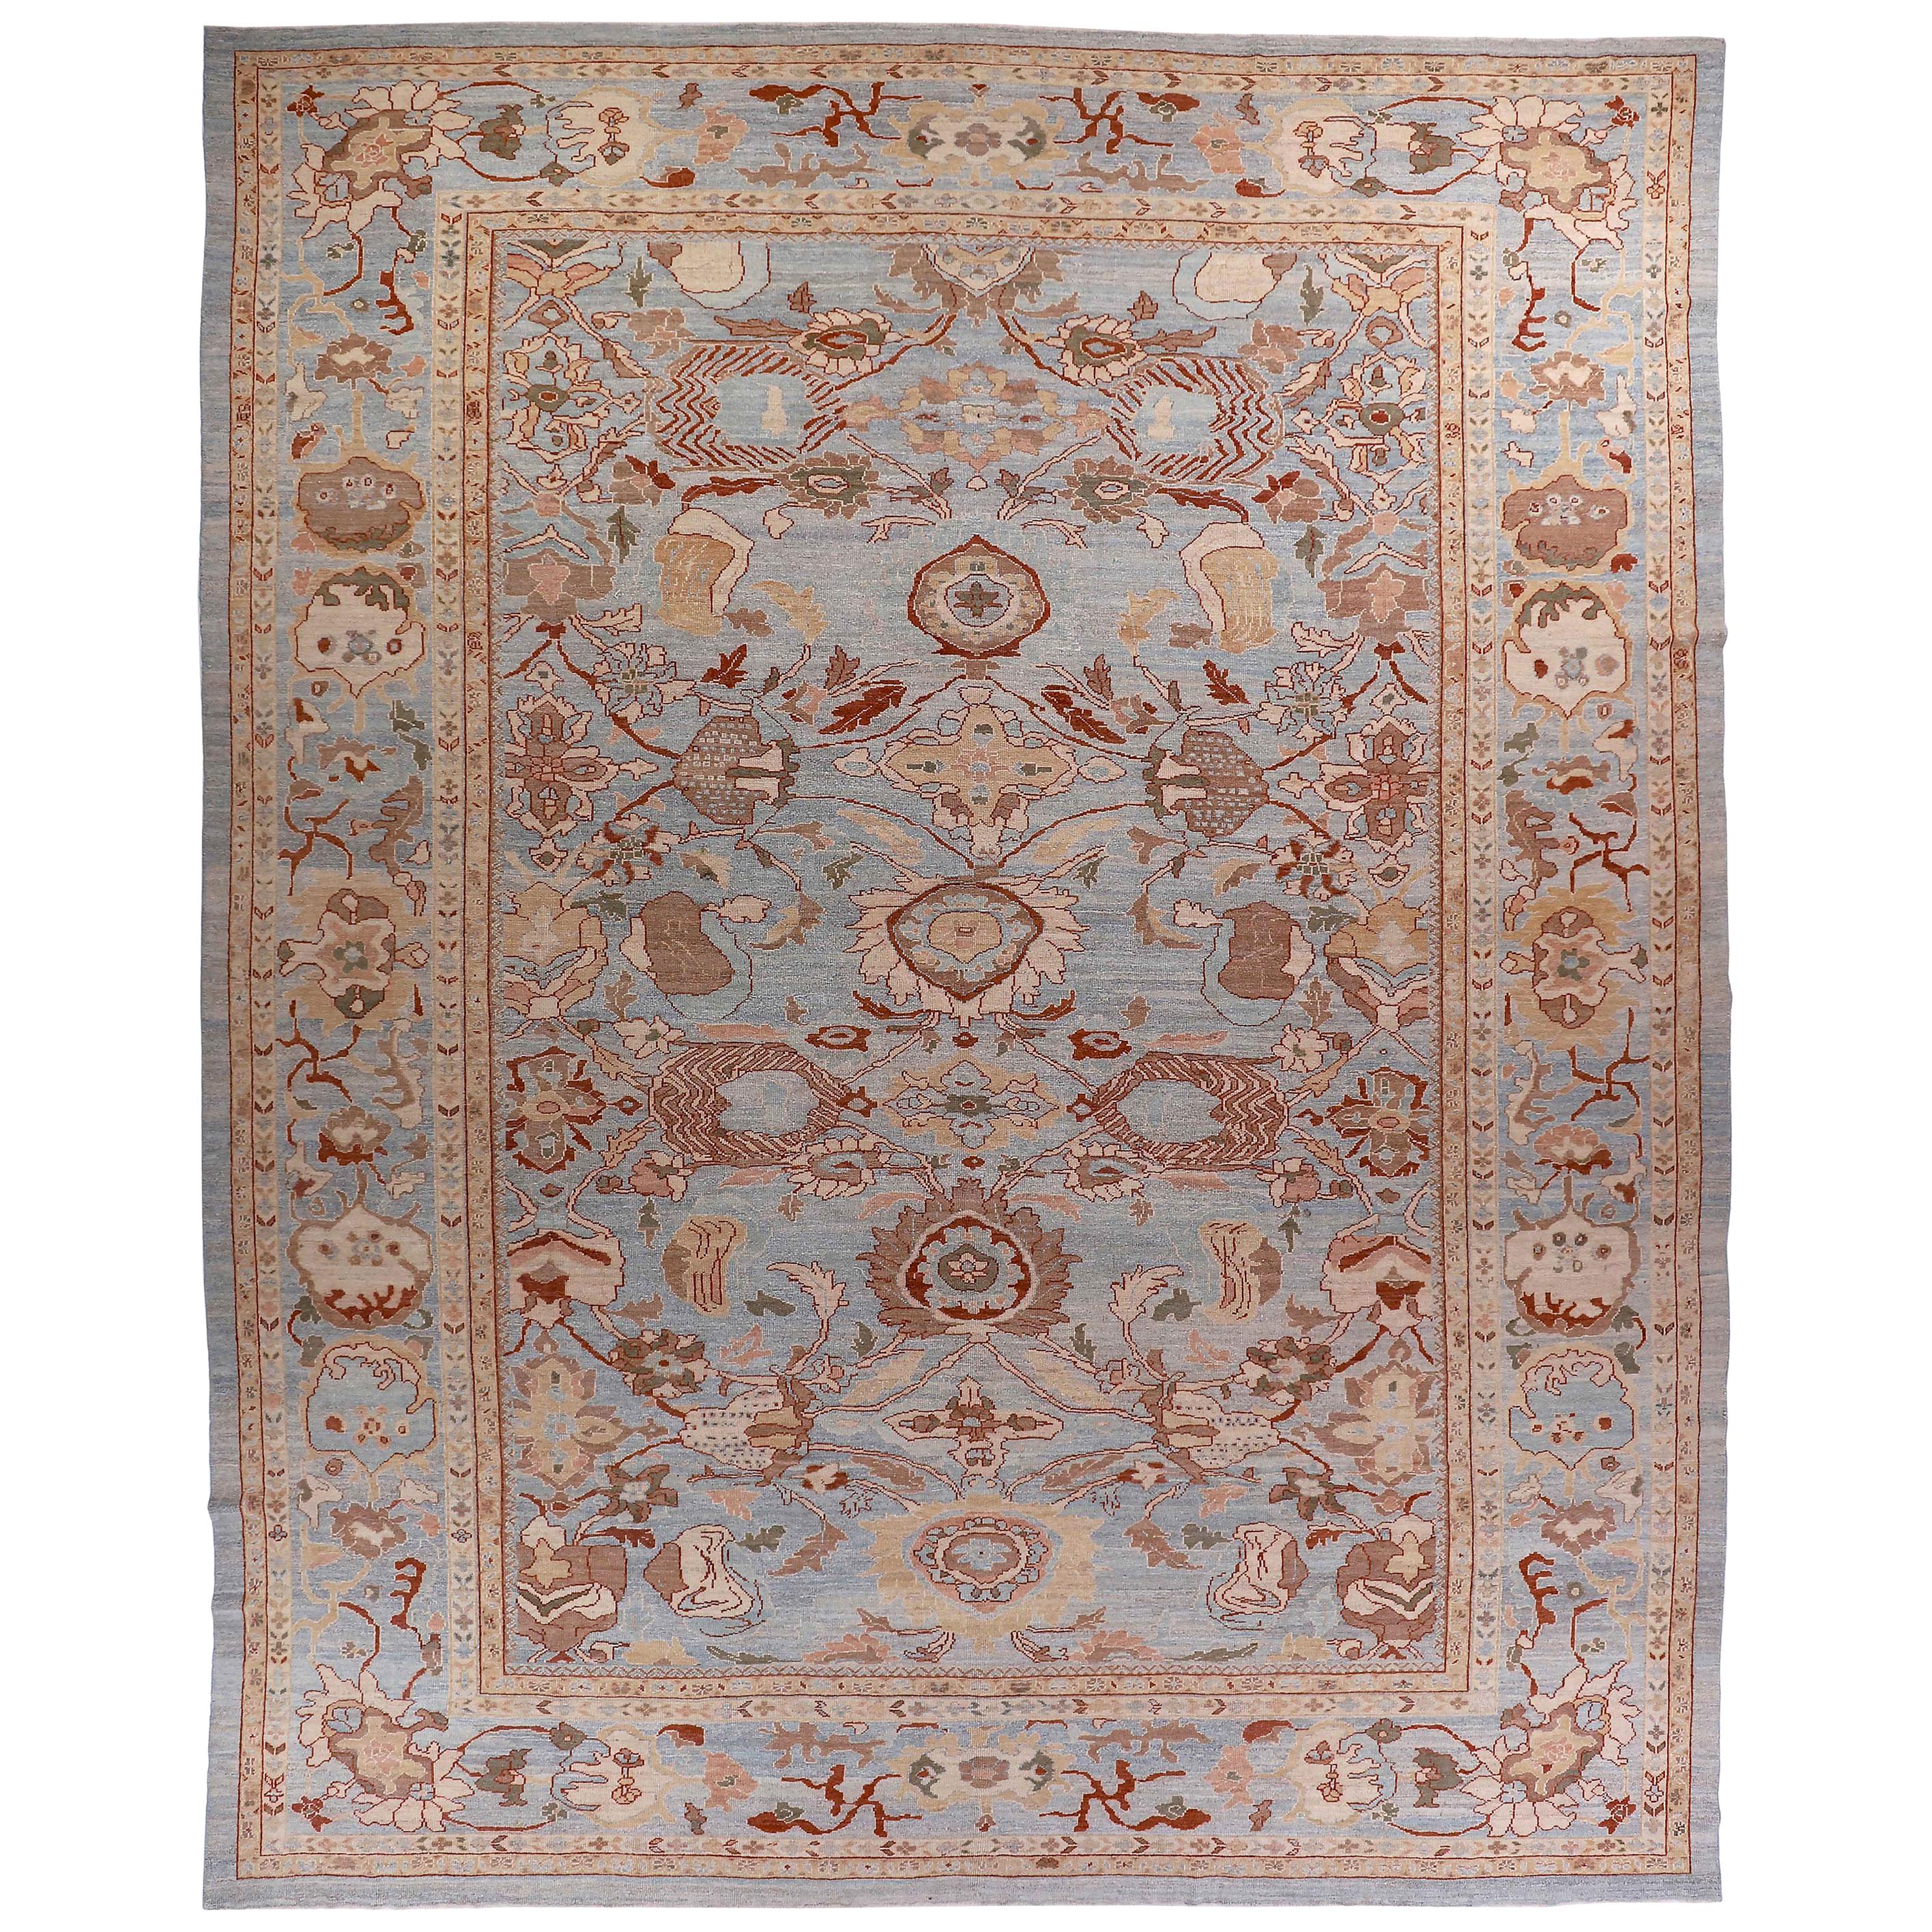 Large Persian Oushak Style Rug with Beige & Brown Floral Patterns on Blue Field For Sale